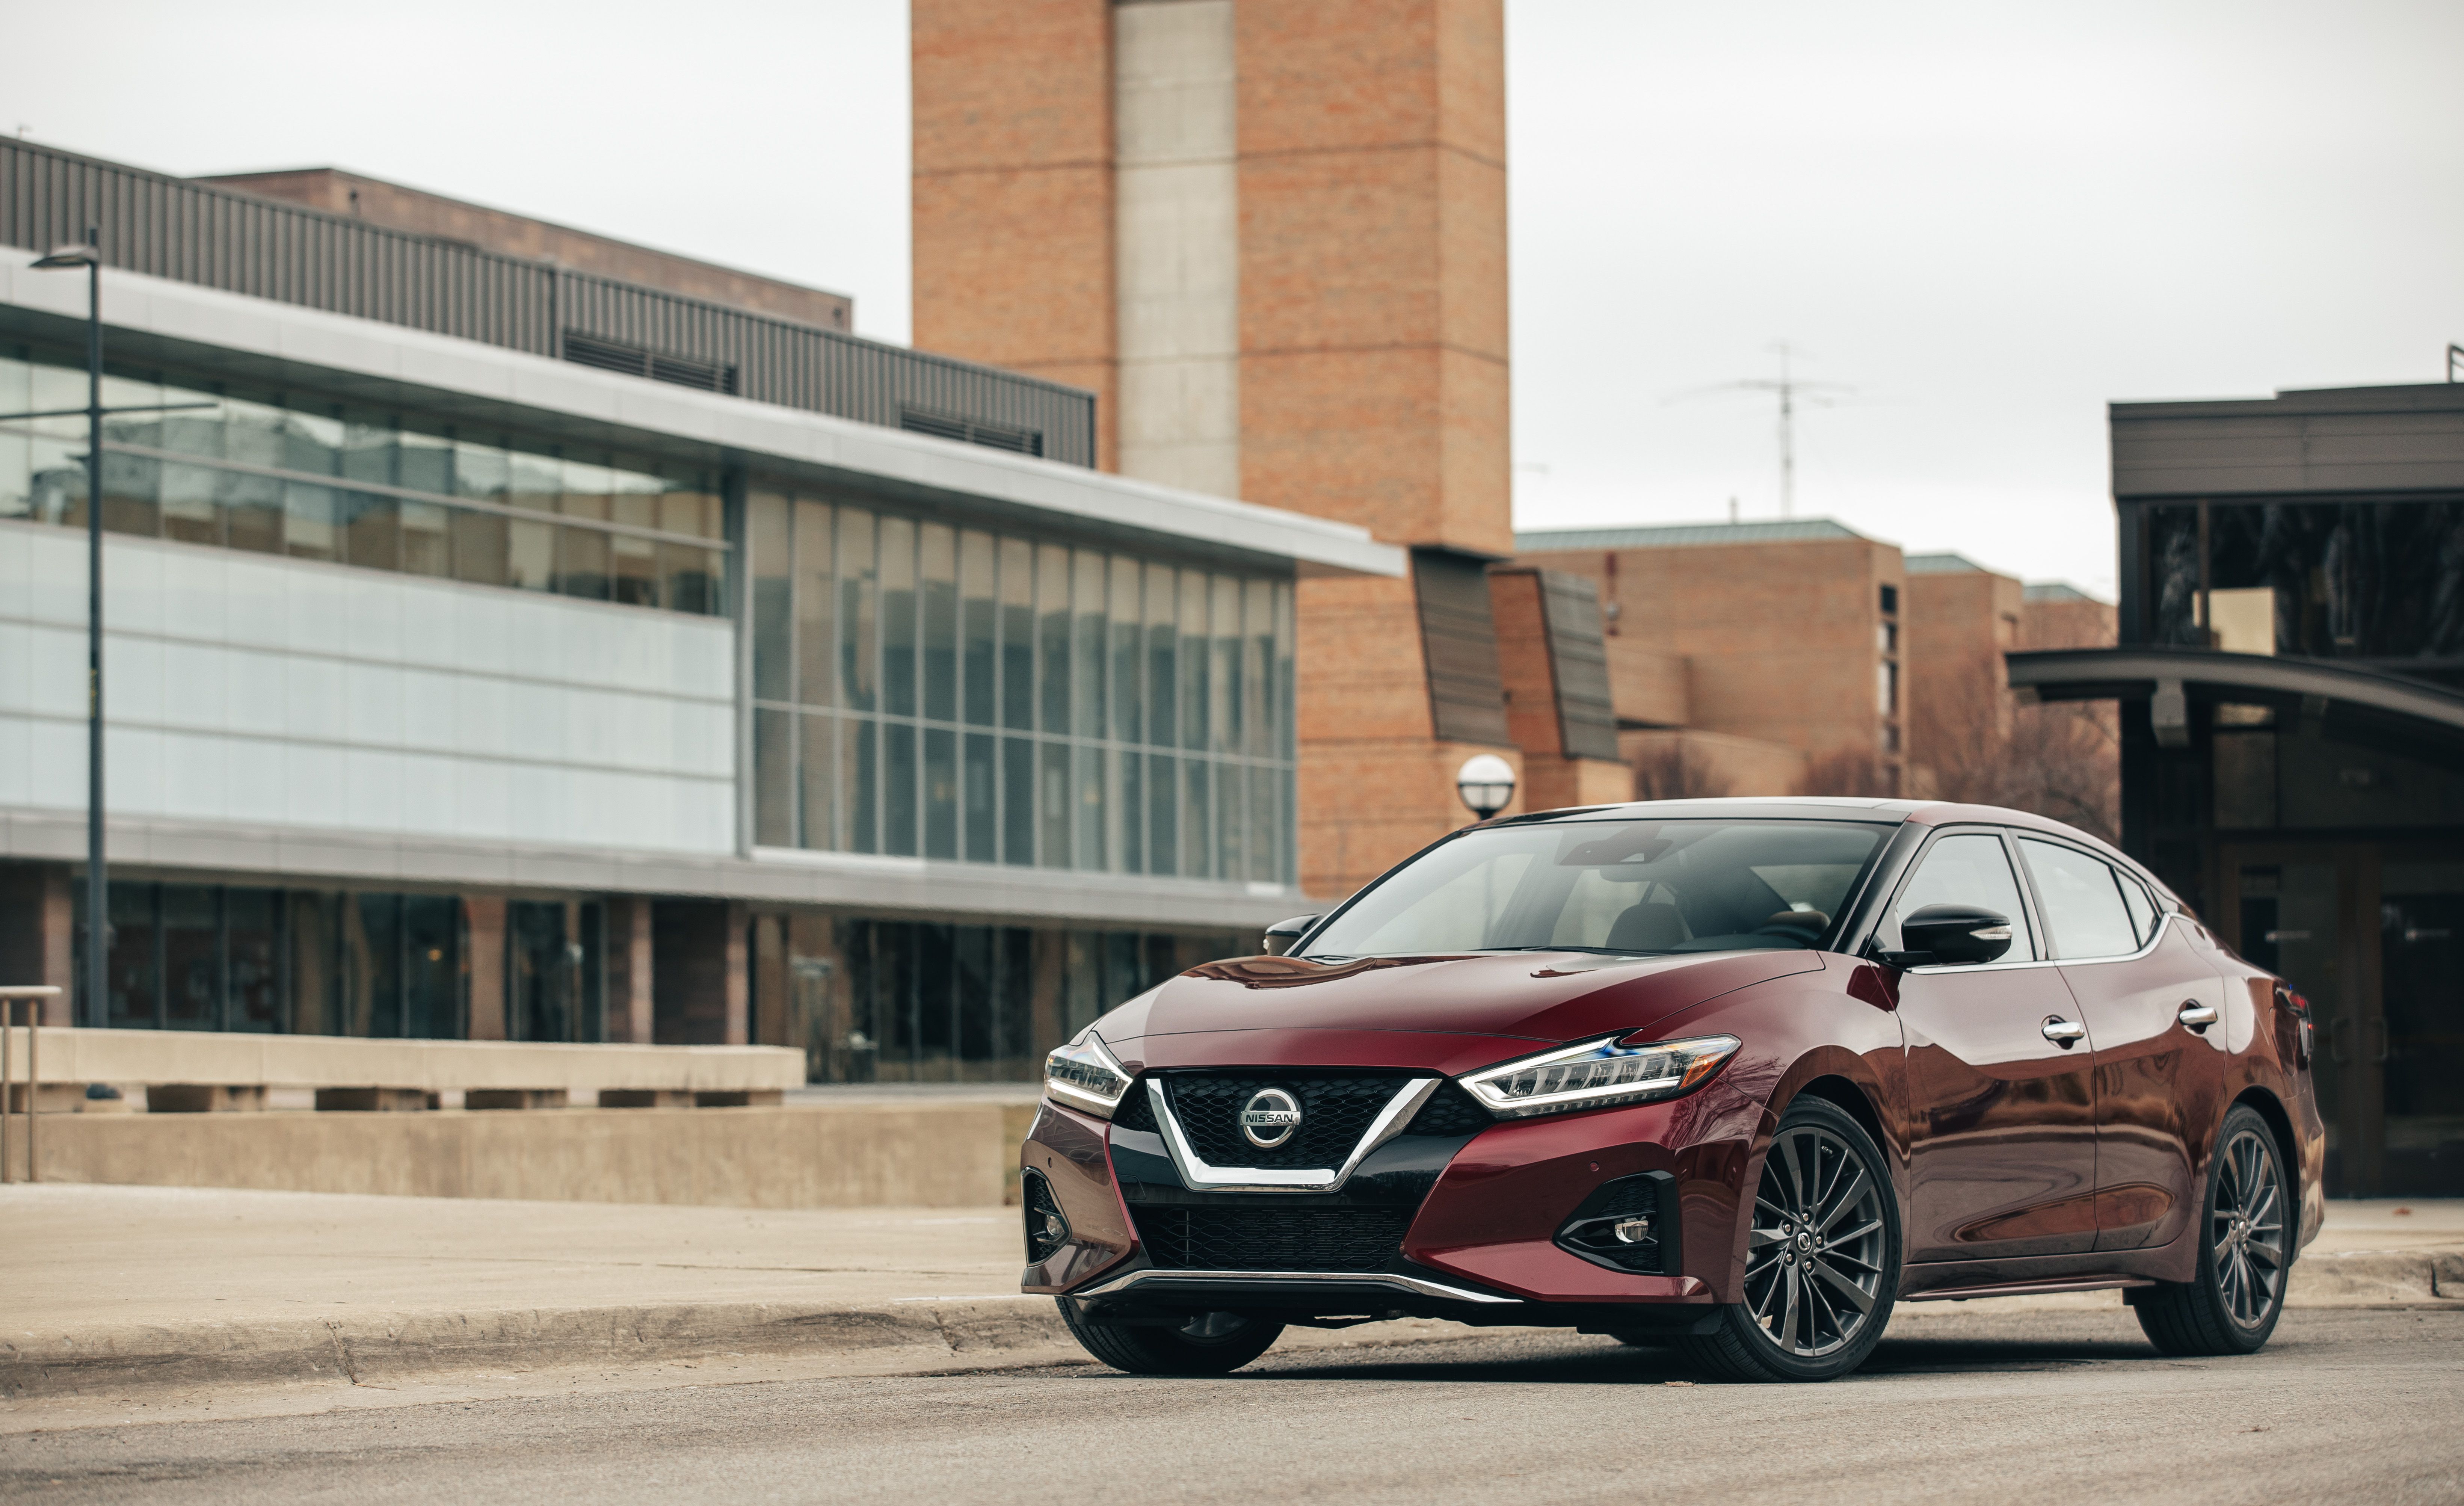 Performance Features of the 2019 Nissan Maxima